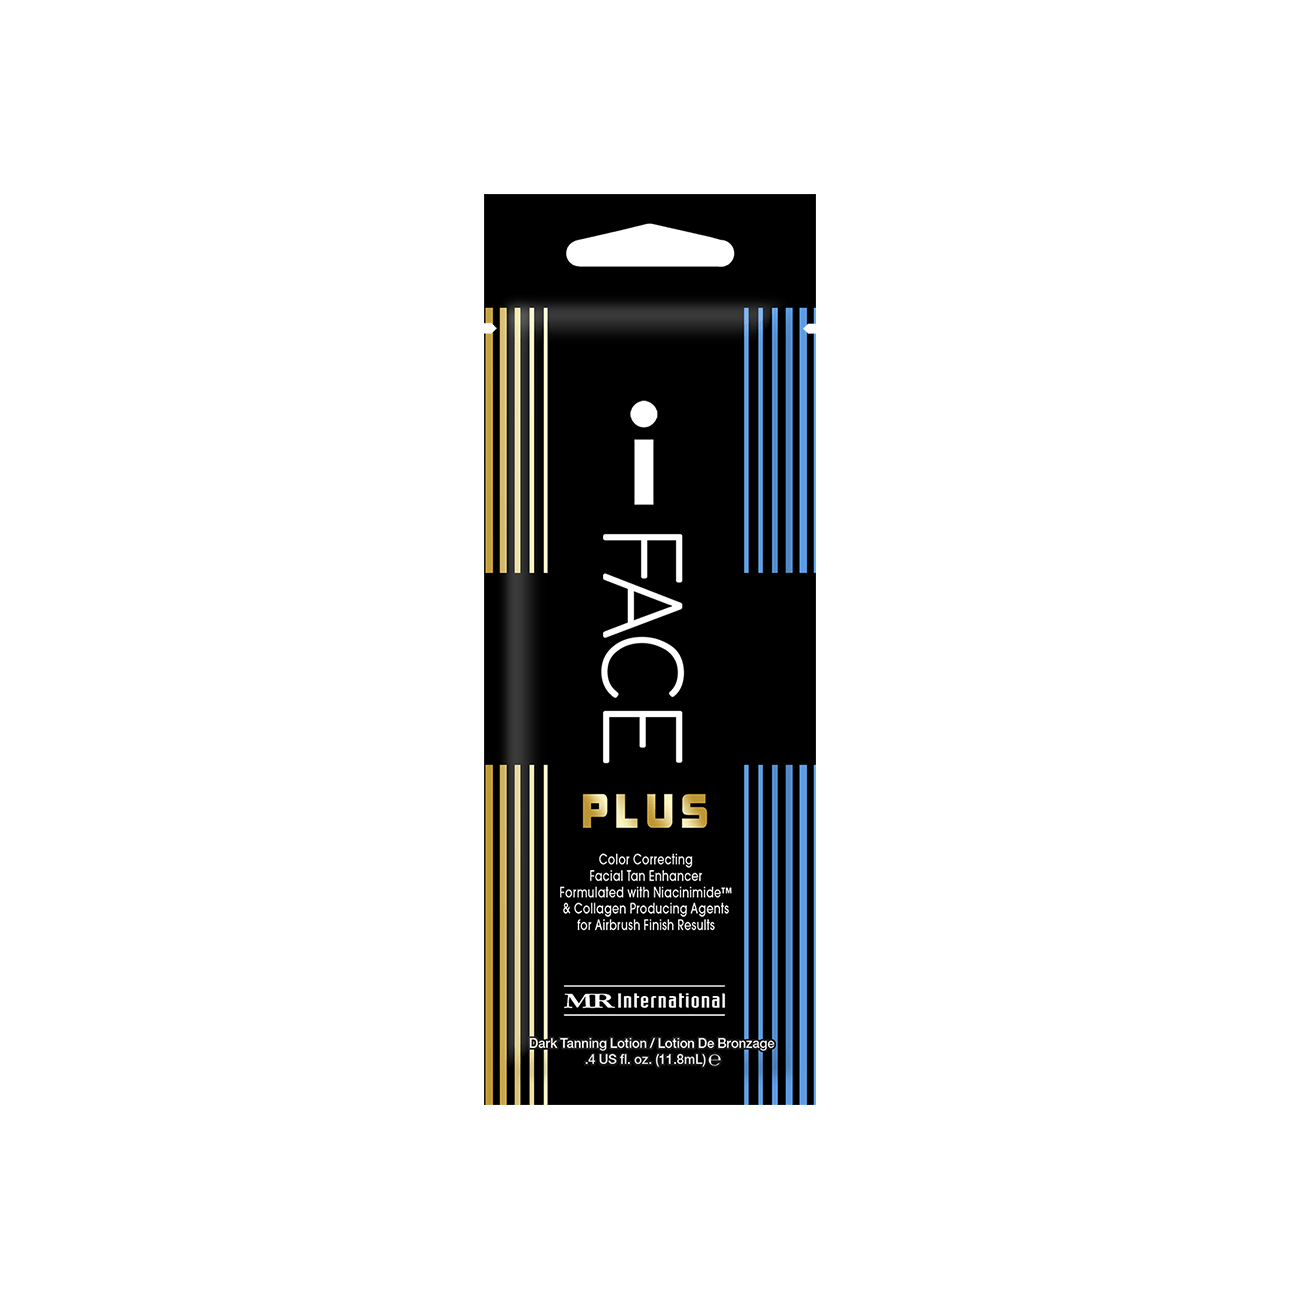 iFace Plus Packets